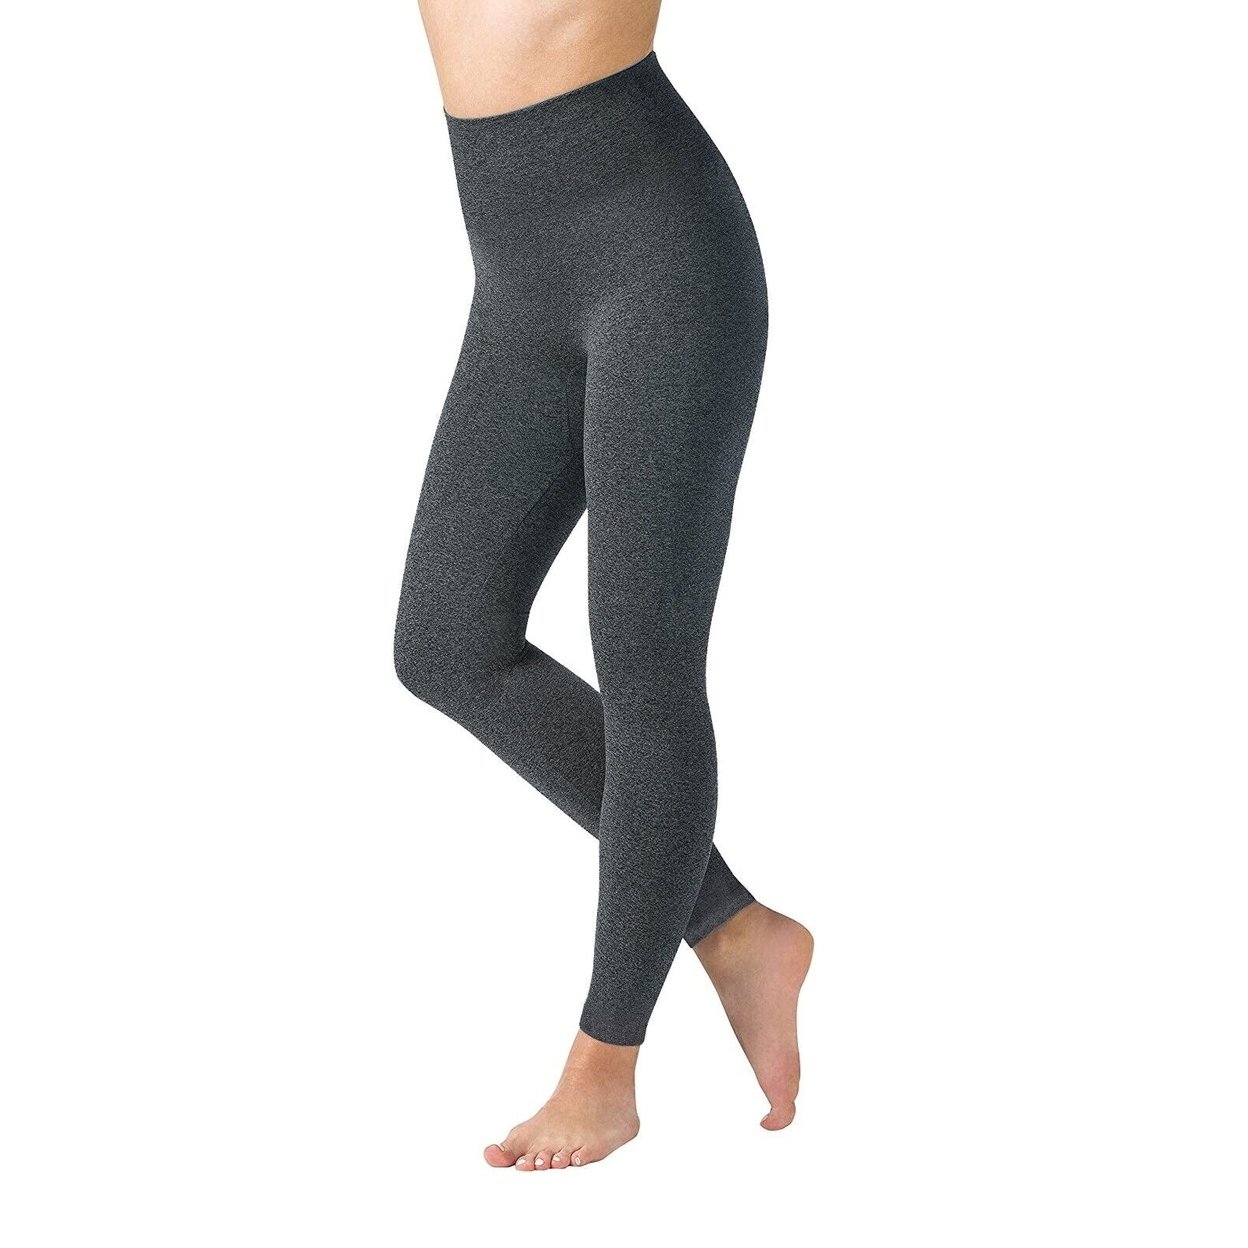 2-Pack Women's Warm High Waist Winter Fleece Lined Stretch Full Length Leggings - Charcoal/charcoal, Large